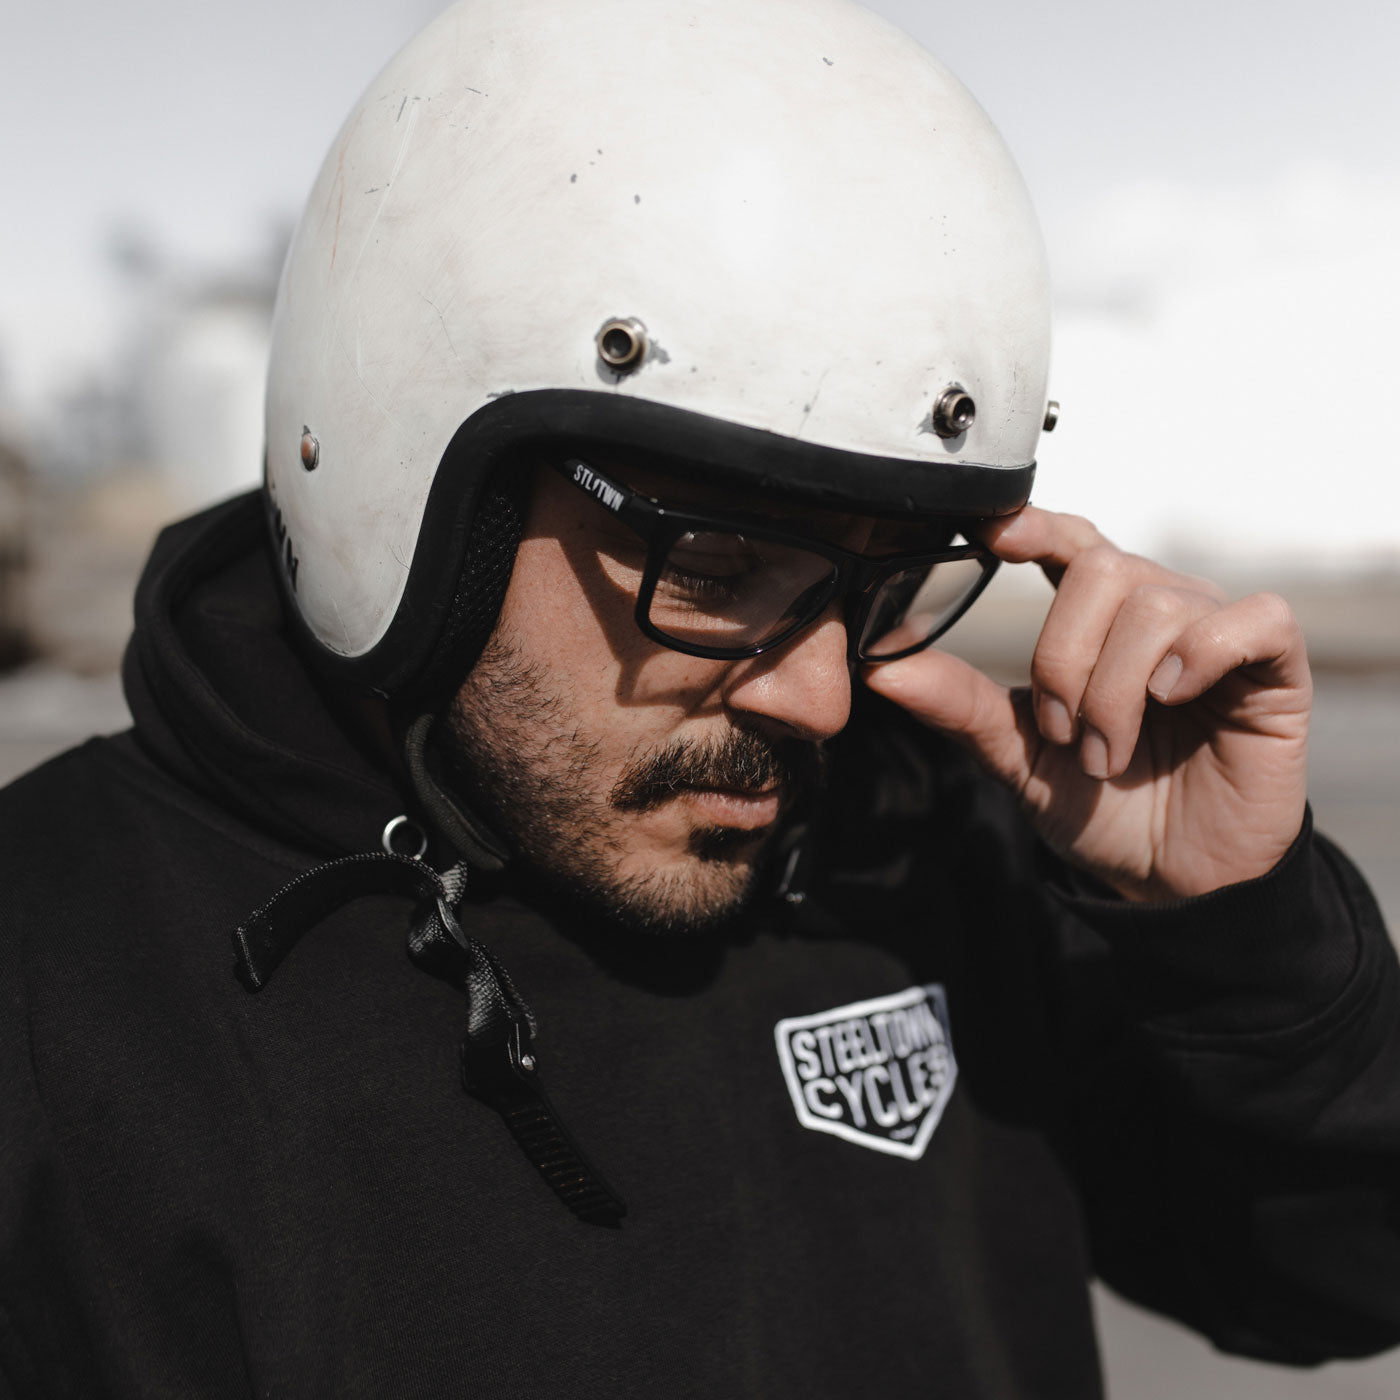 Impact Resistant Motorcycle Riding Glasses from Steeltown Garage –  Steeltown Garage Co.